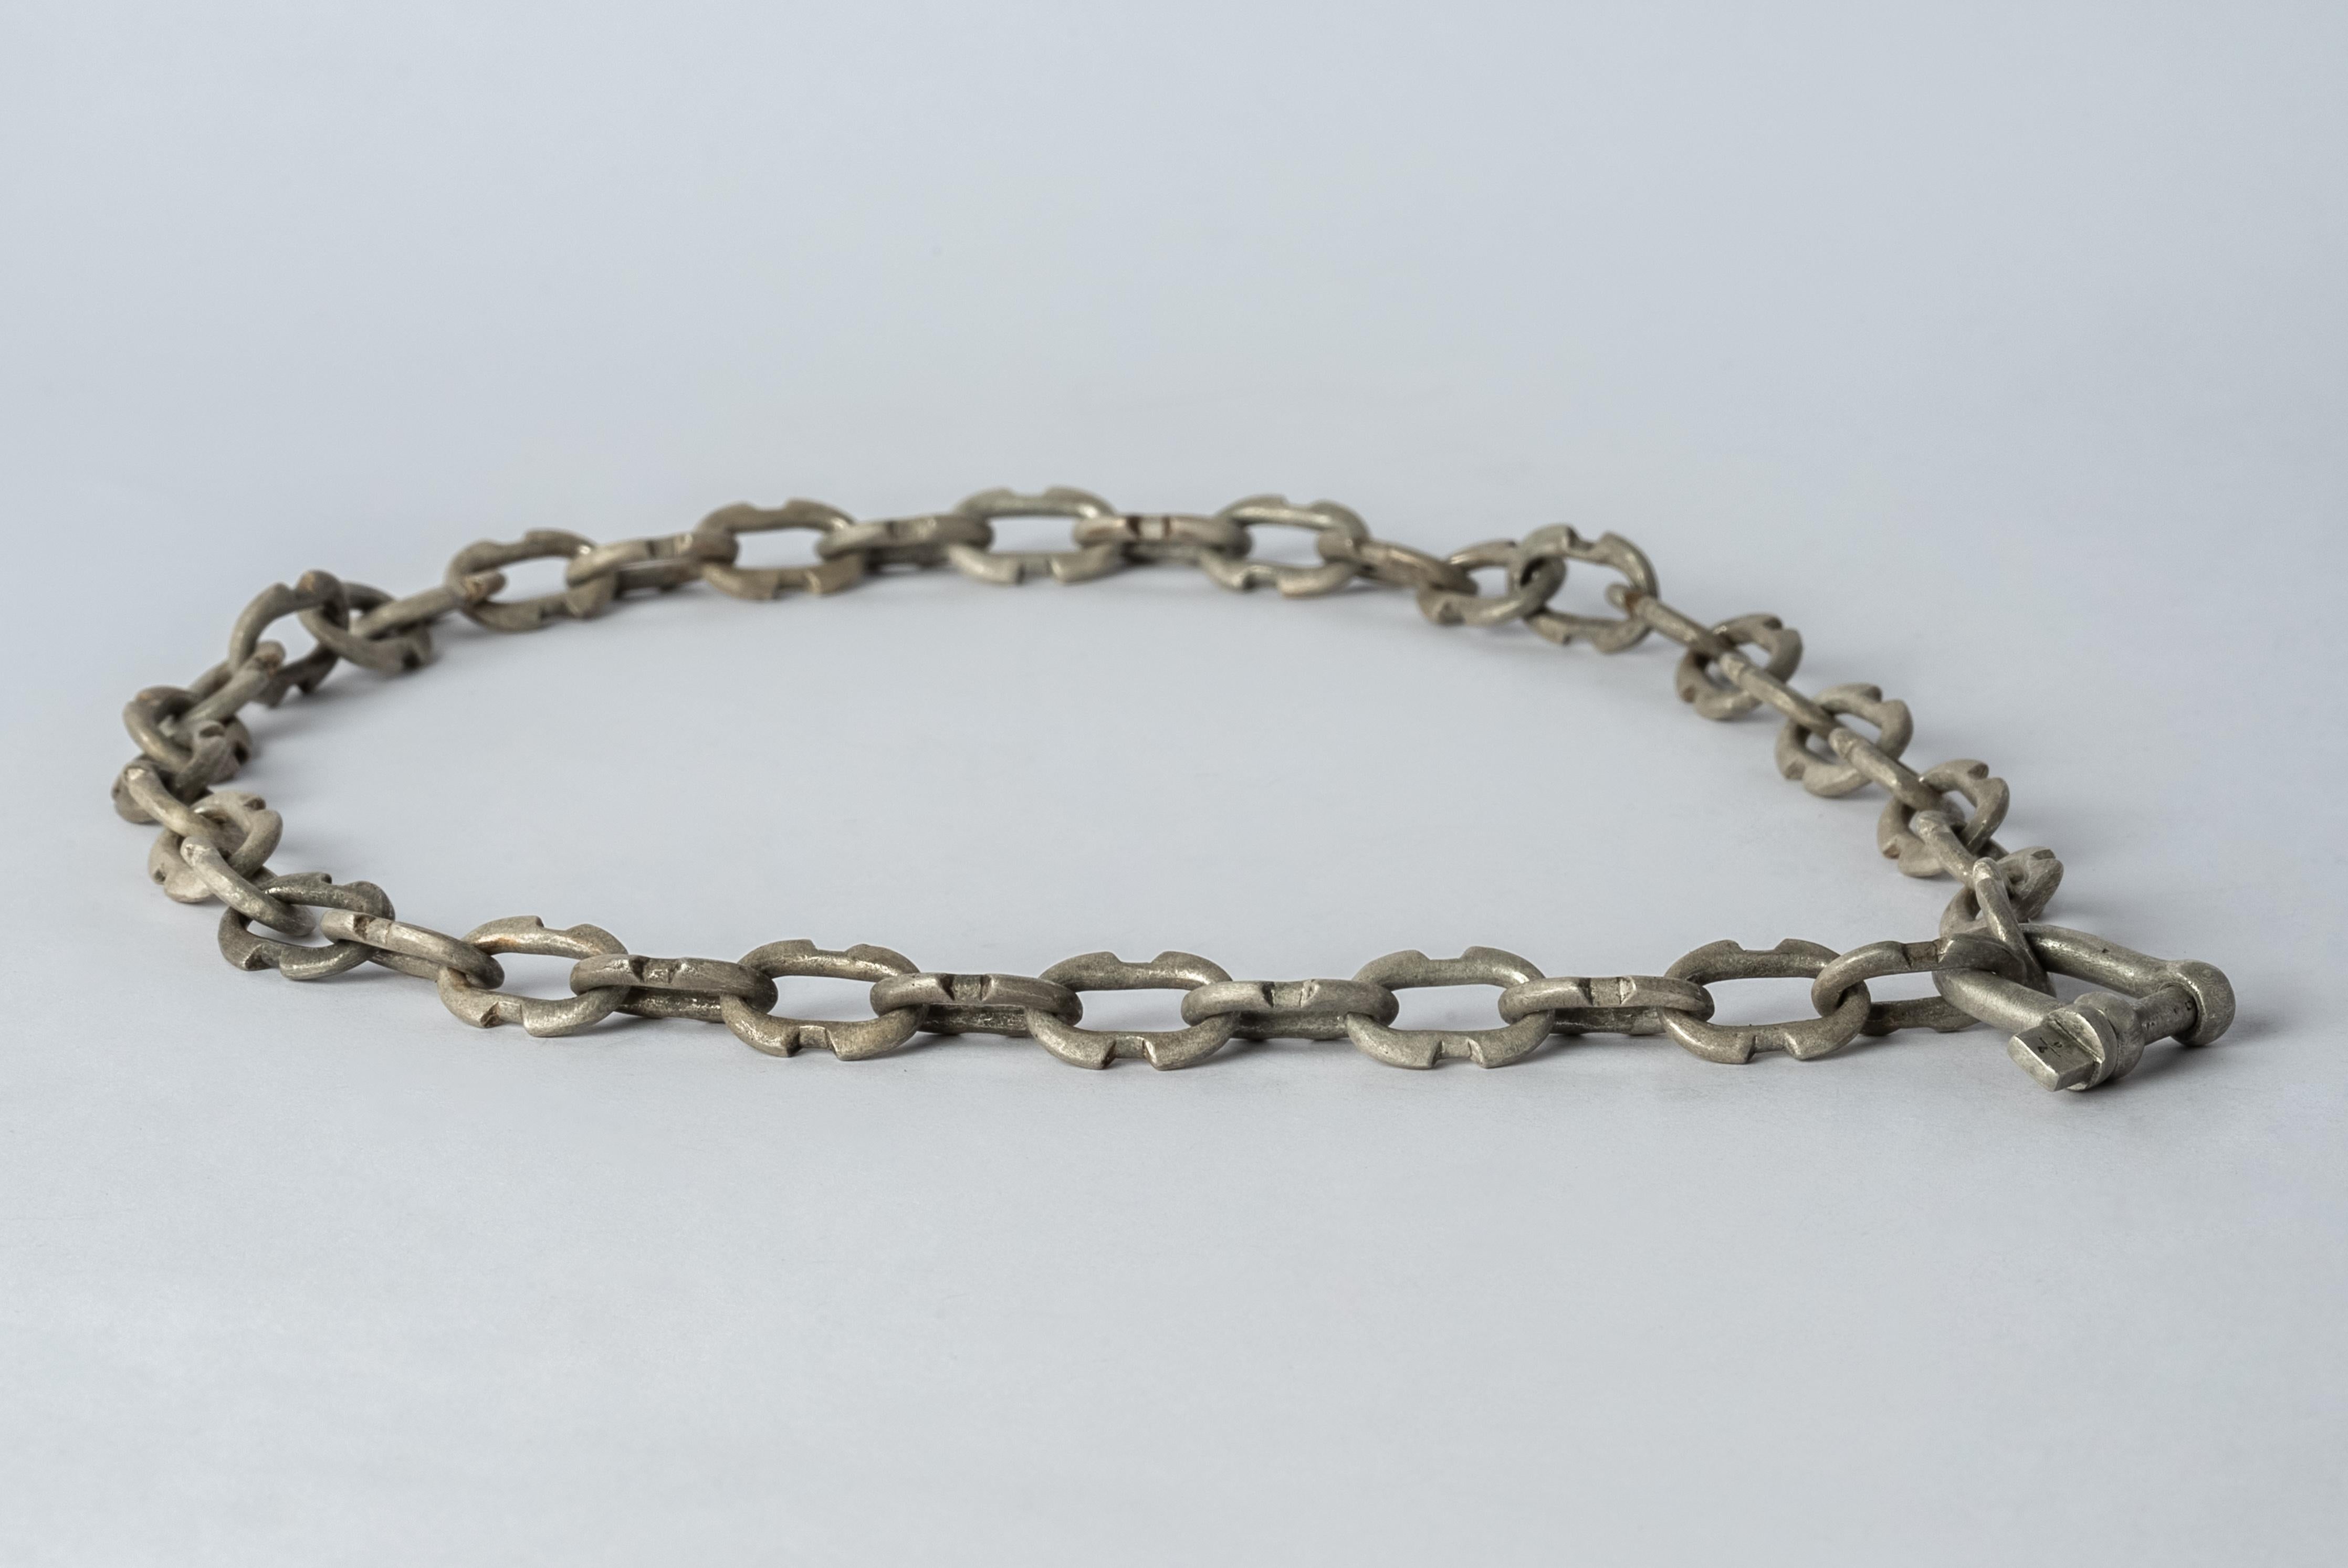 Chain necklace in sterling silver.
The Charm System is an interrelated group of products that can be mixed and matched or worn individually.
Chain link size (L × H): 14 mm × 9 mm
Chain length: 400 mm
U-bolt (H × W): 17 mm × 13 mm